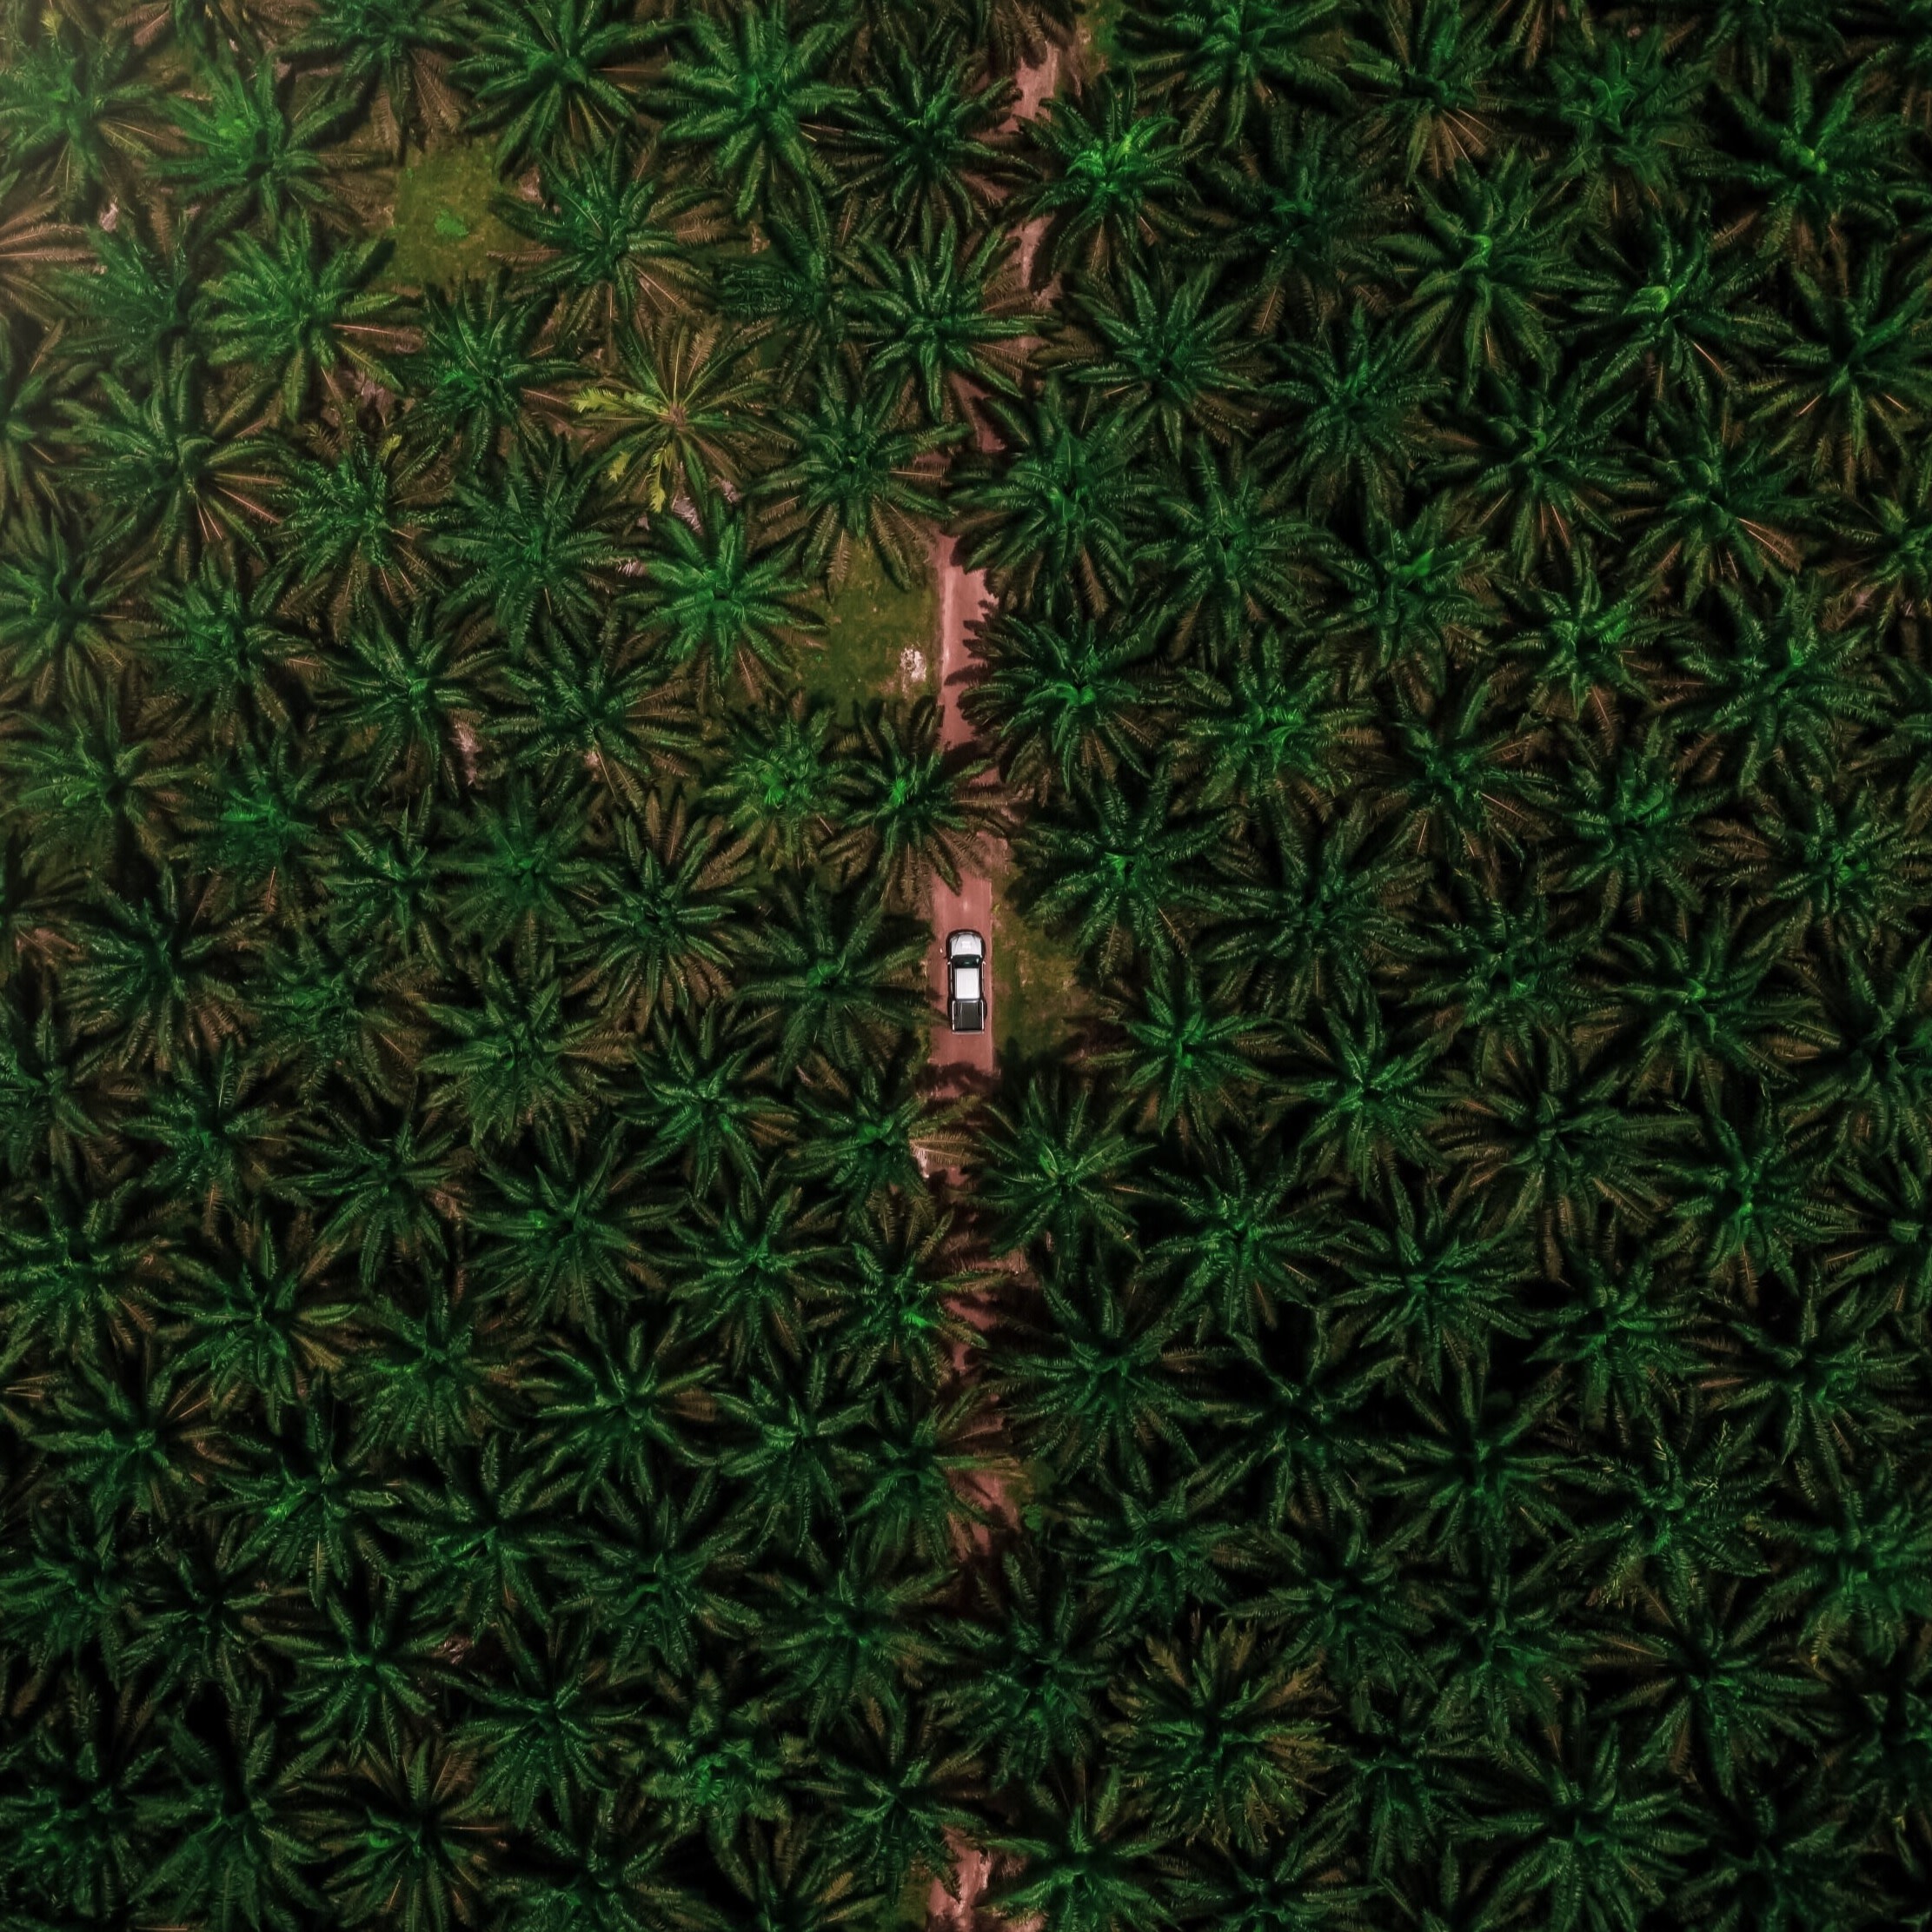 Palm oil image from Unsplash